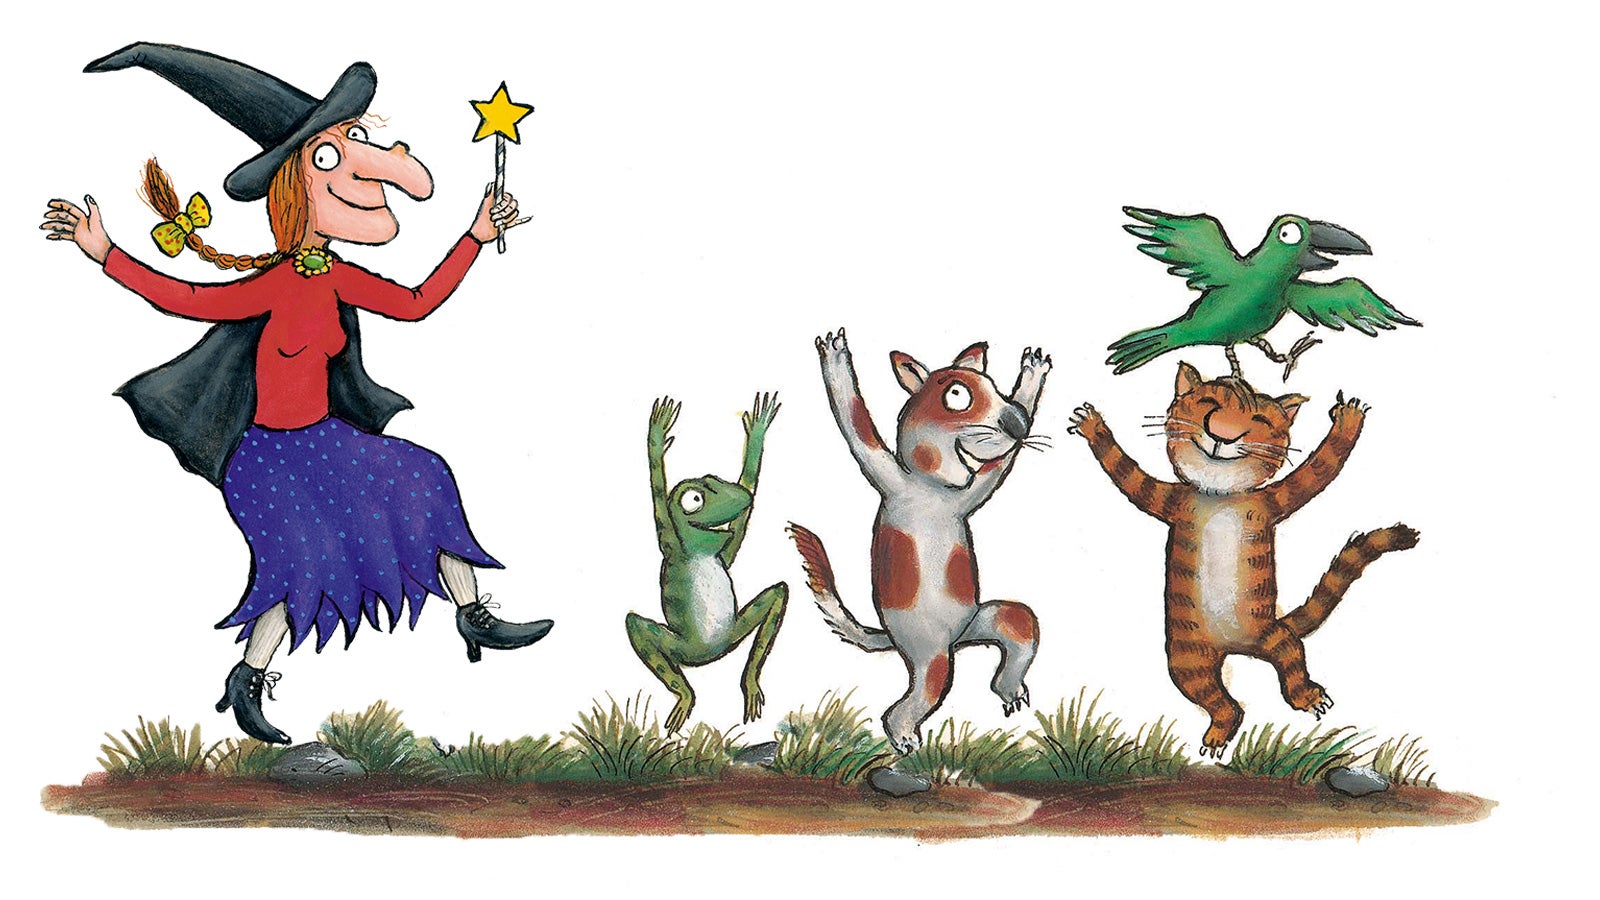 An illustration of the characters from Room on the Broom jumping for joy.